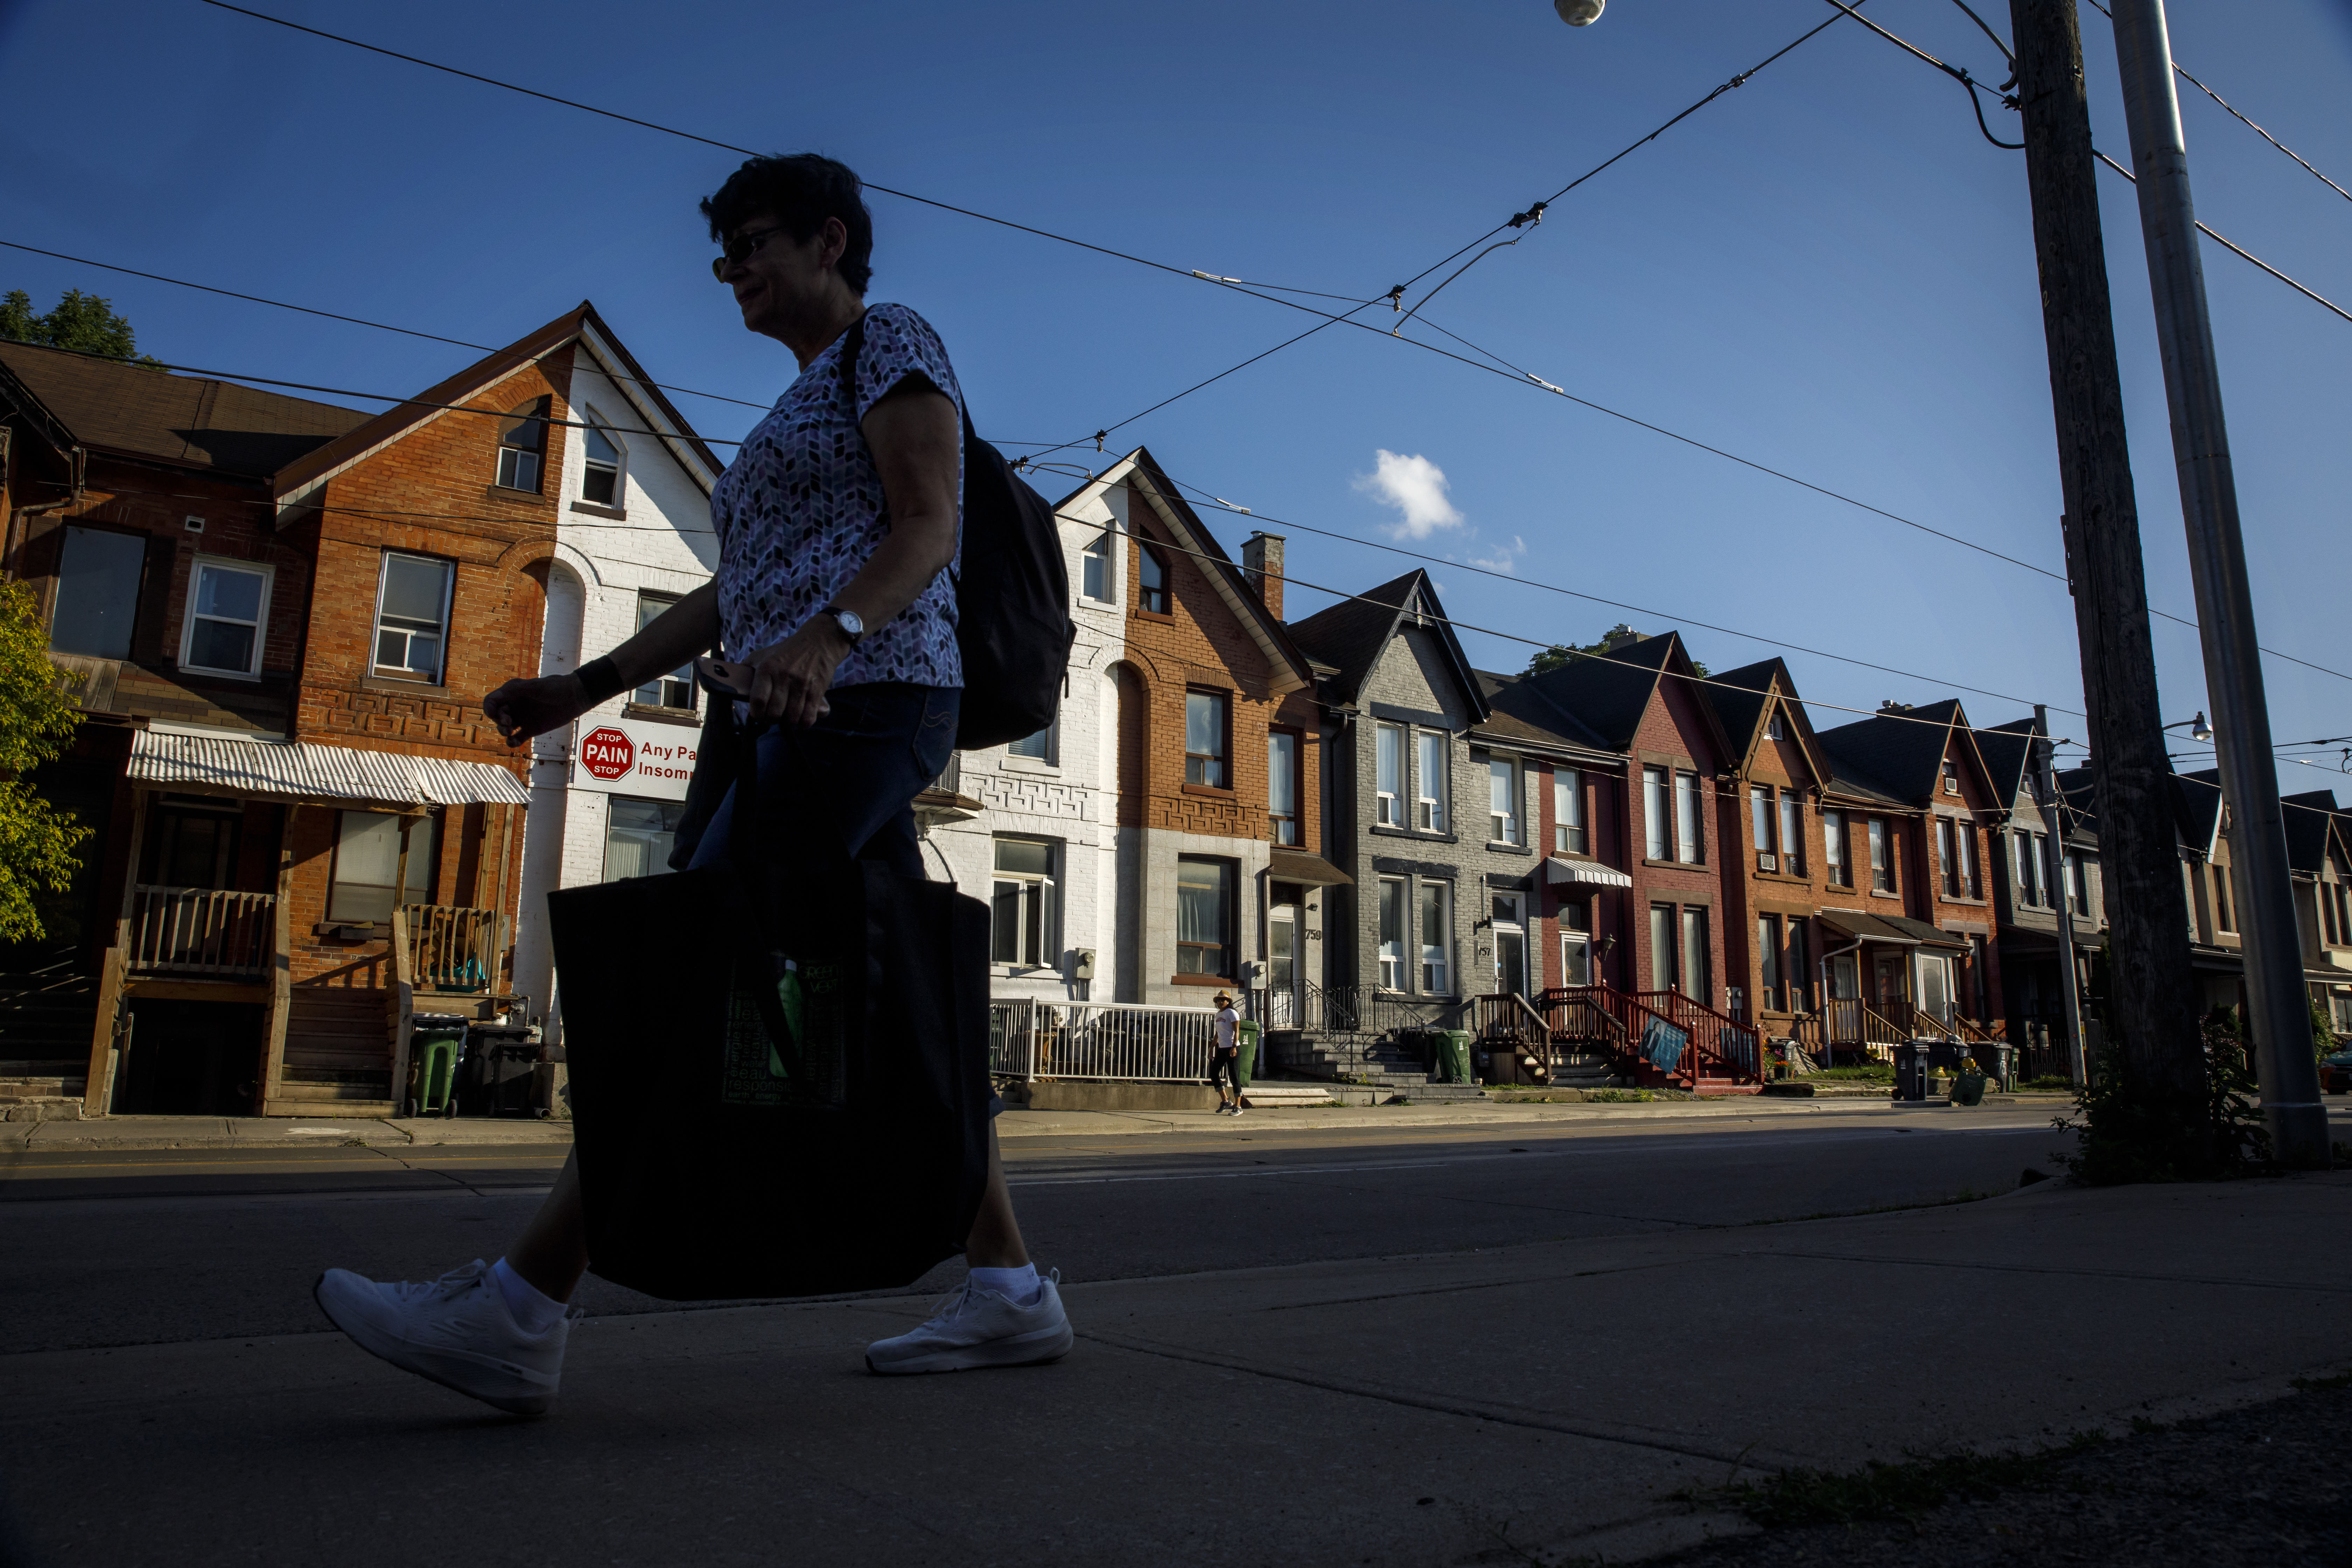 Affordability issues are ‘casting a shadow’ over young
Canadians’ economic futures